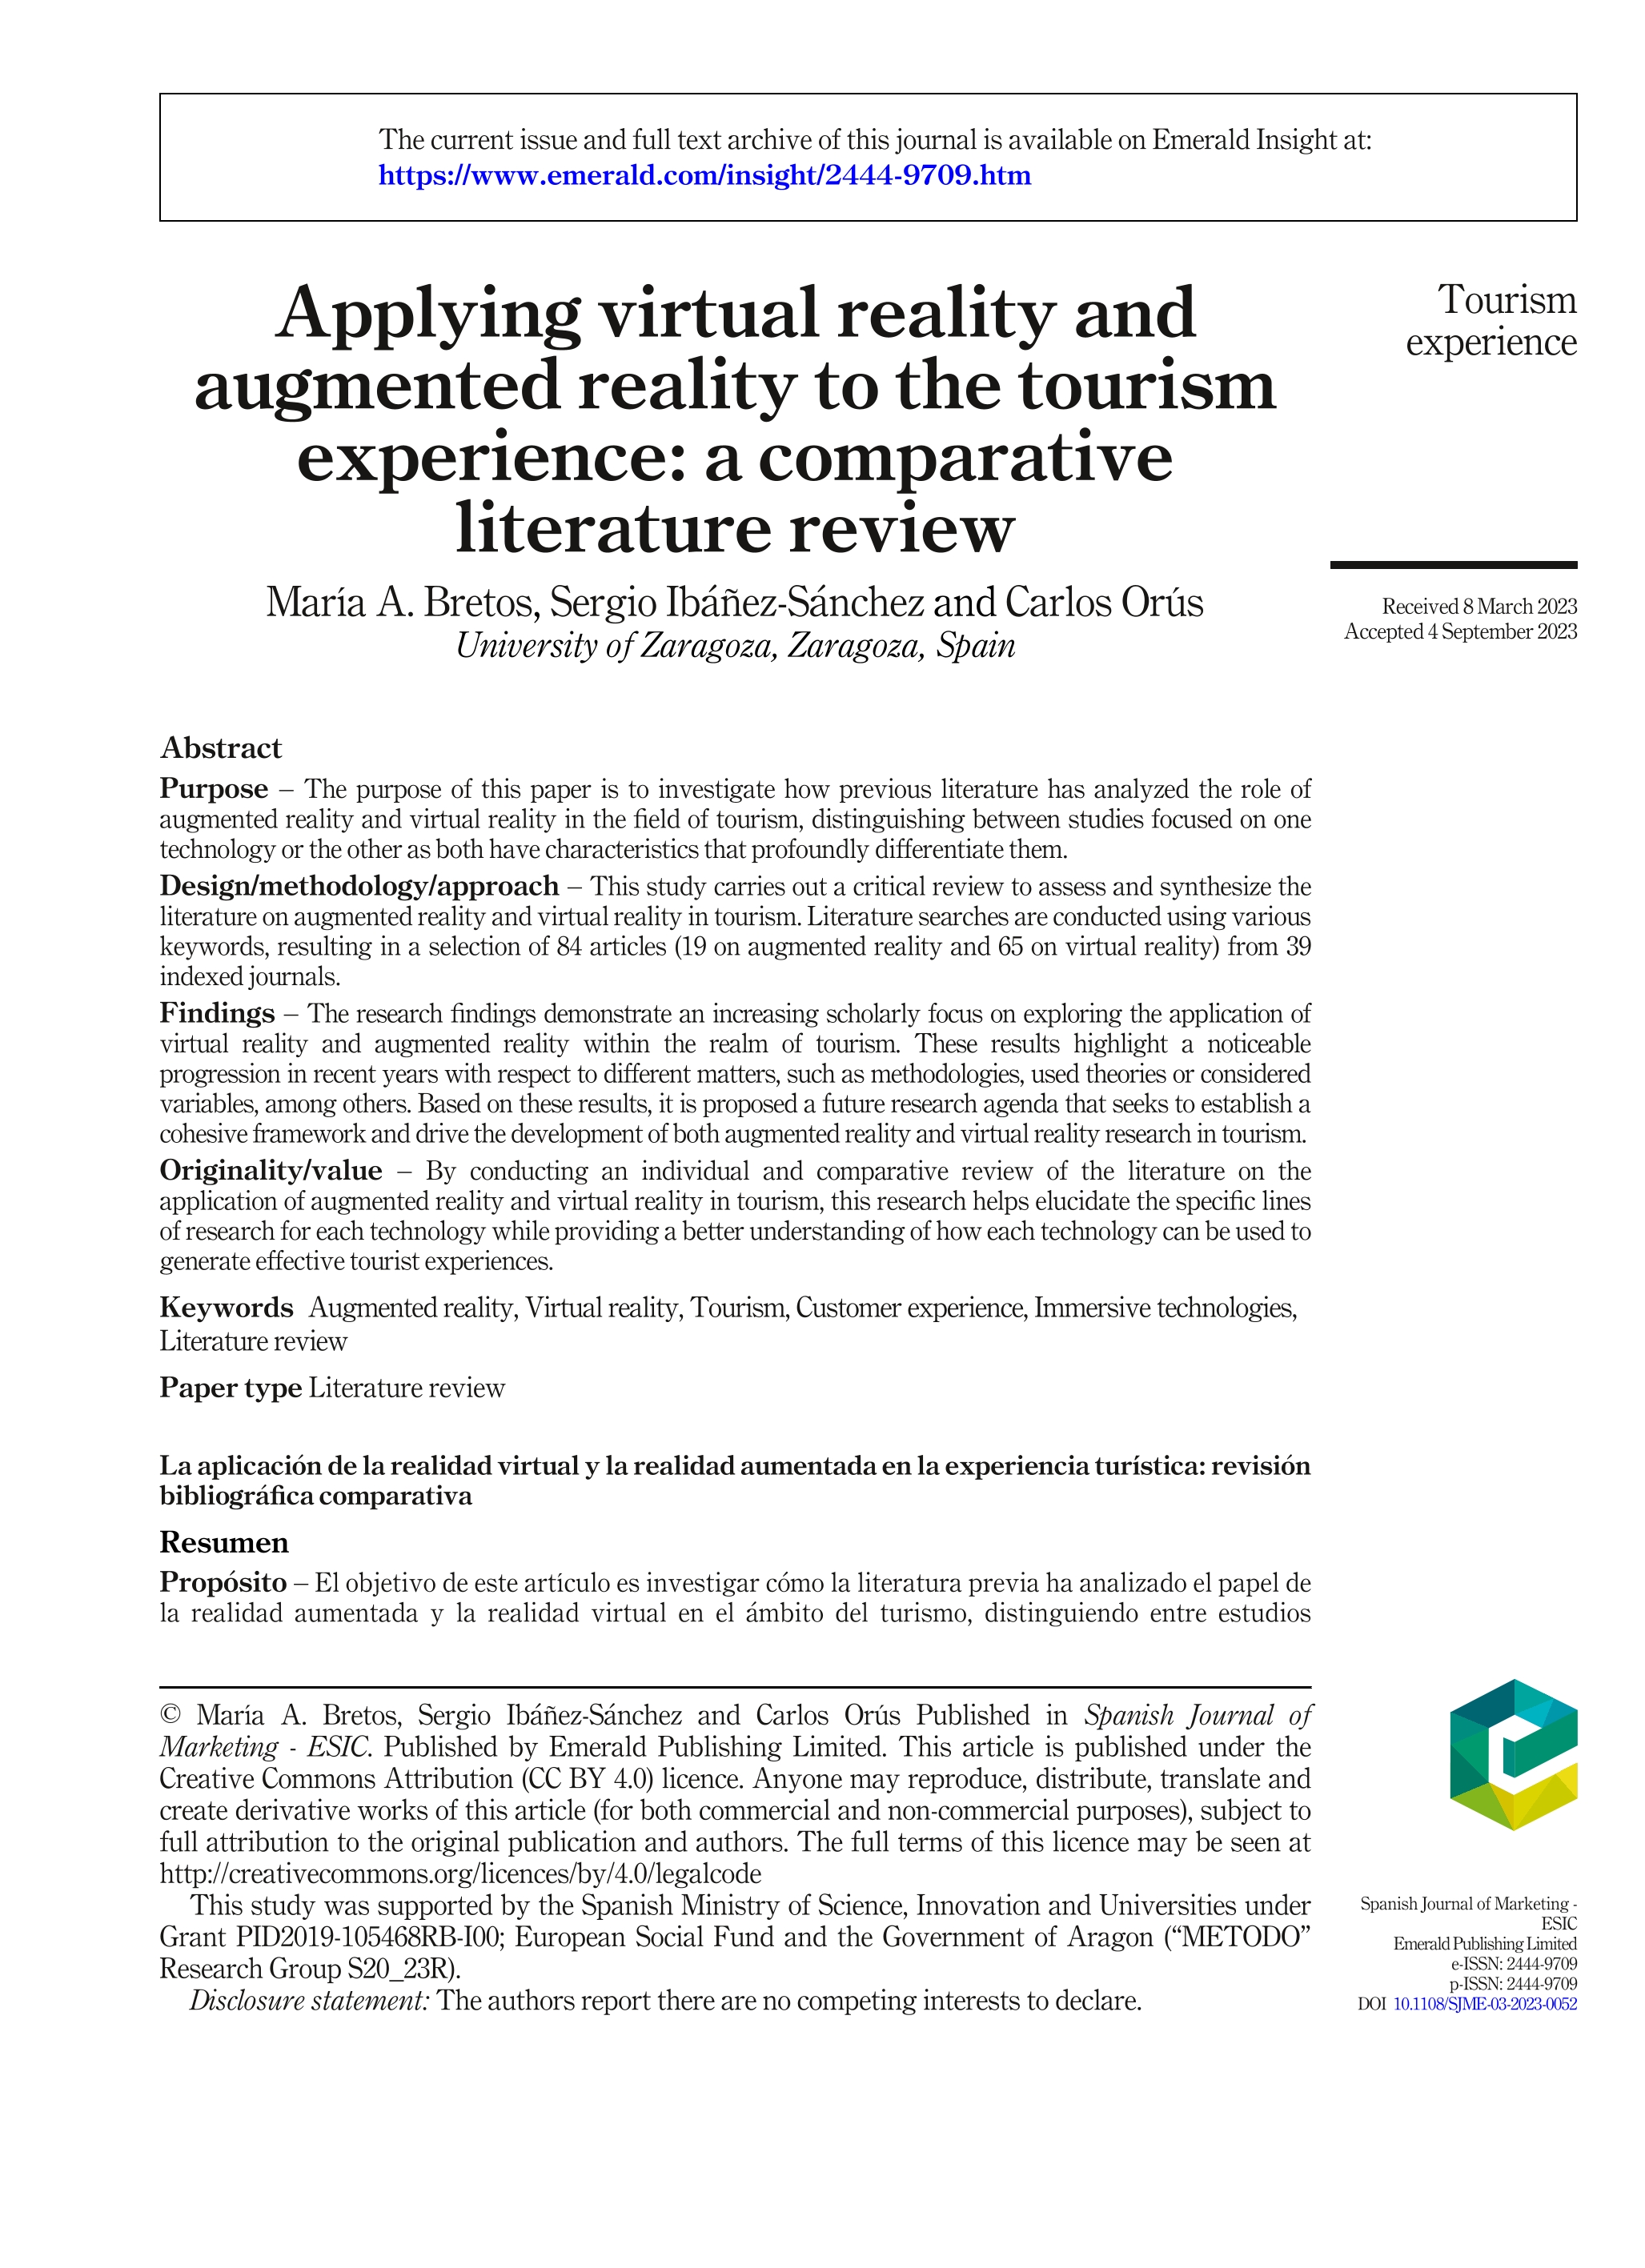 Applying virtual reality and augmented reality to the tourism experience: a comparative literature review